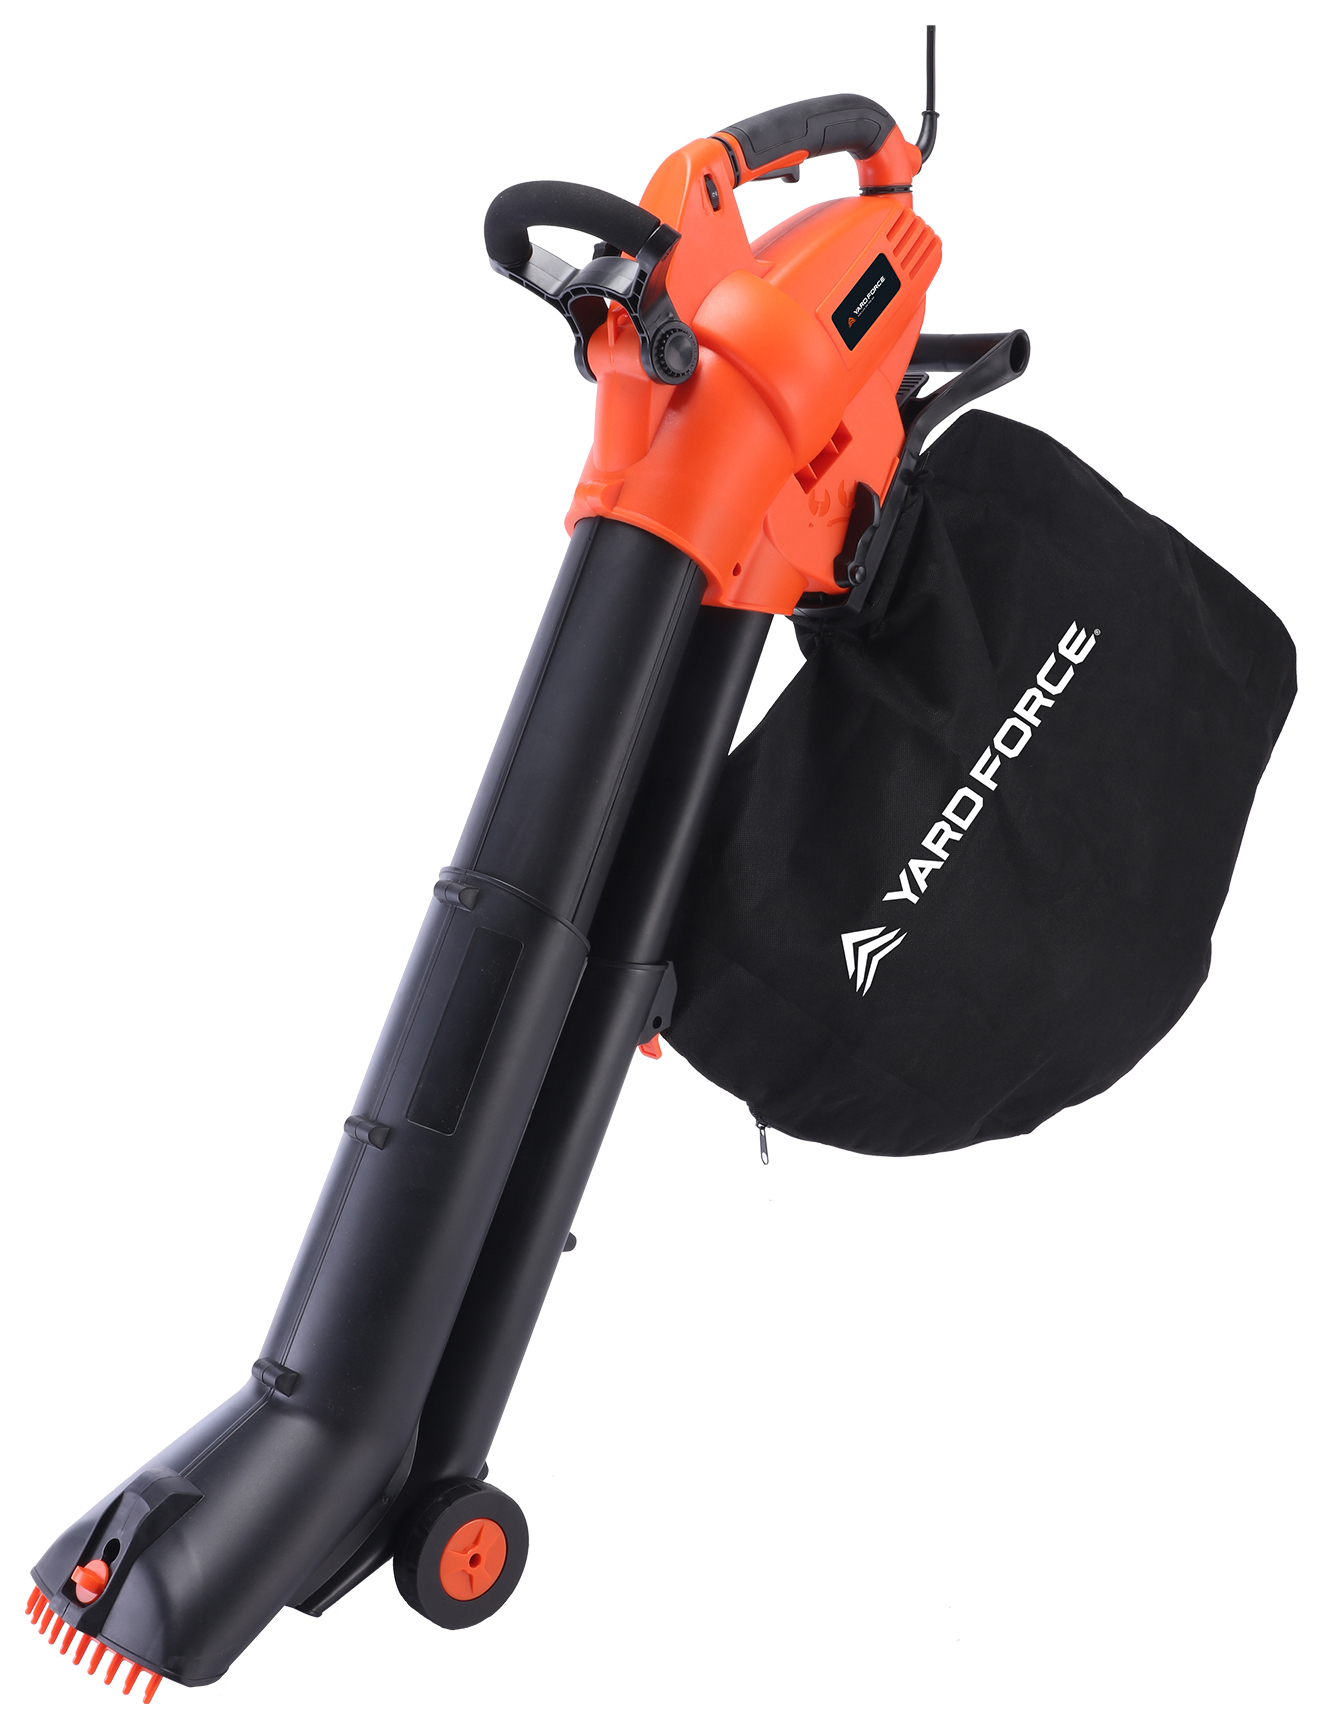 Yard Force 3-in-1 Corded Blower Vac - 3000W